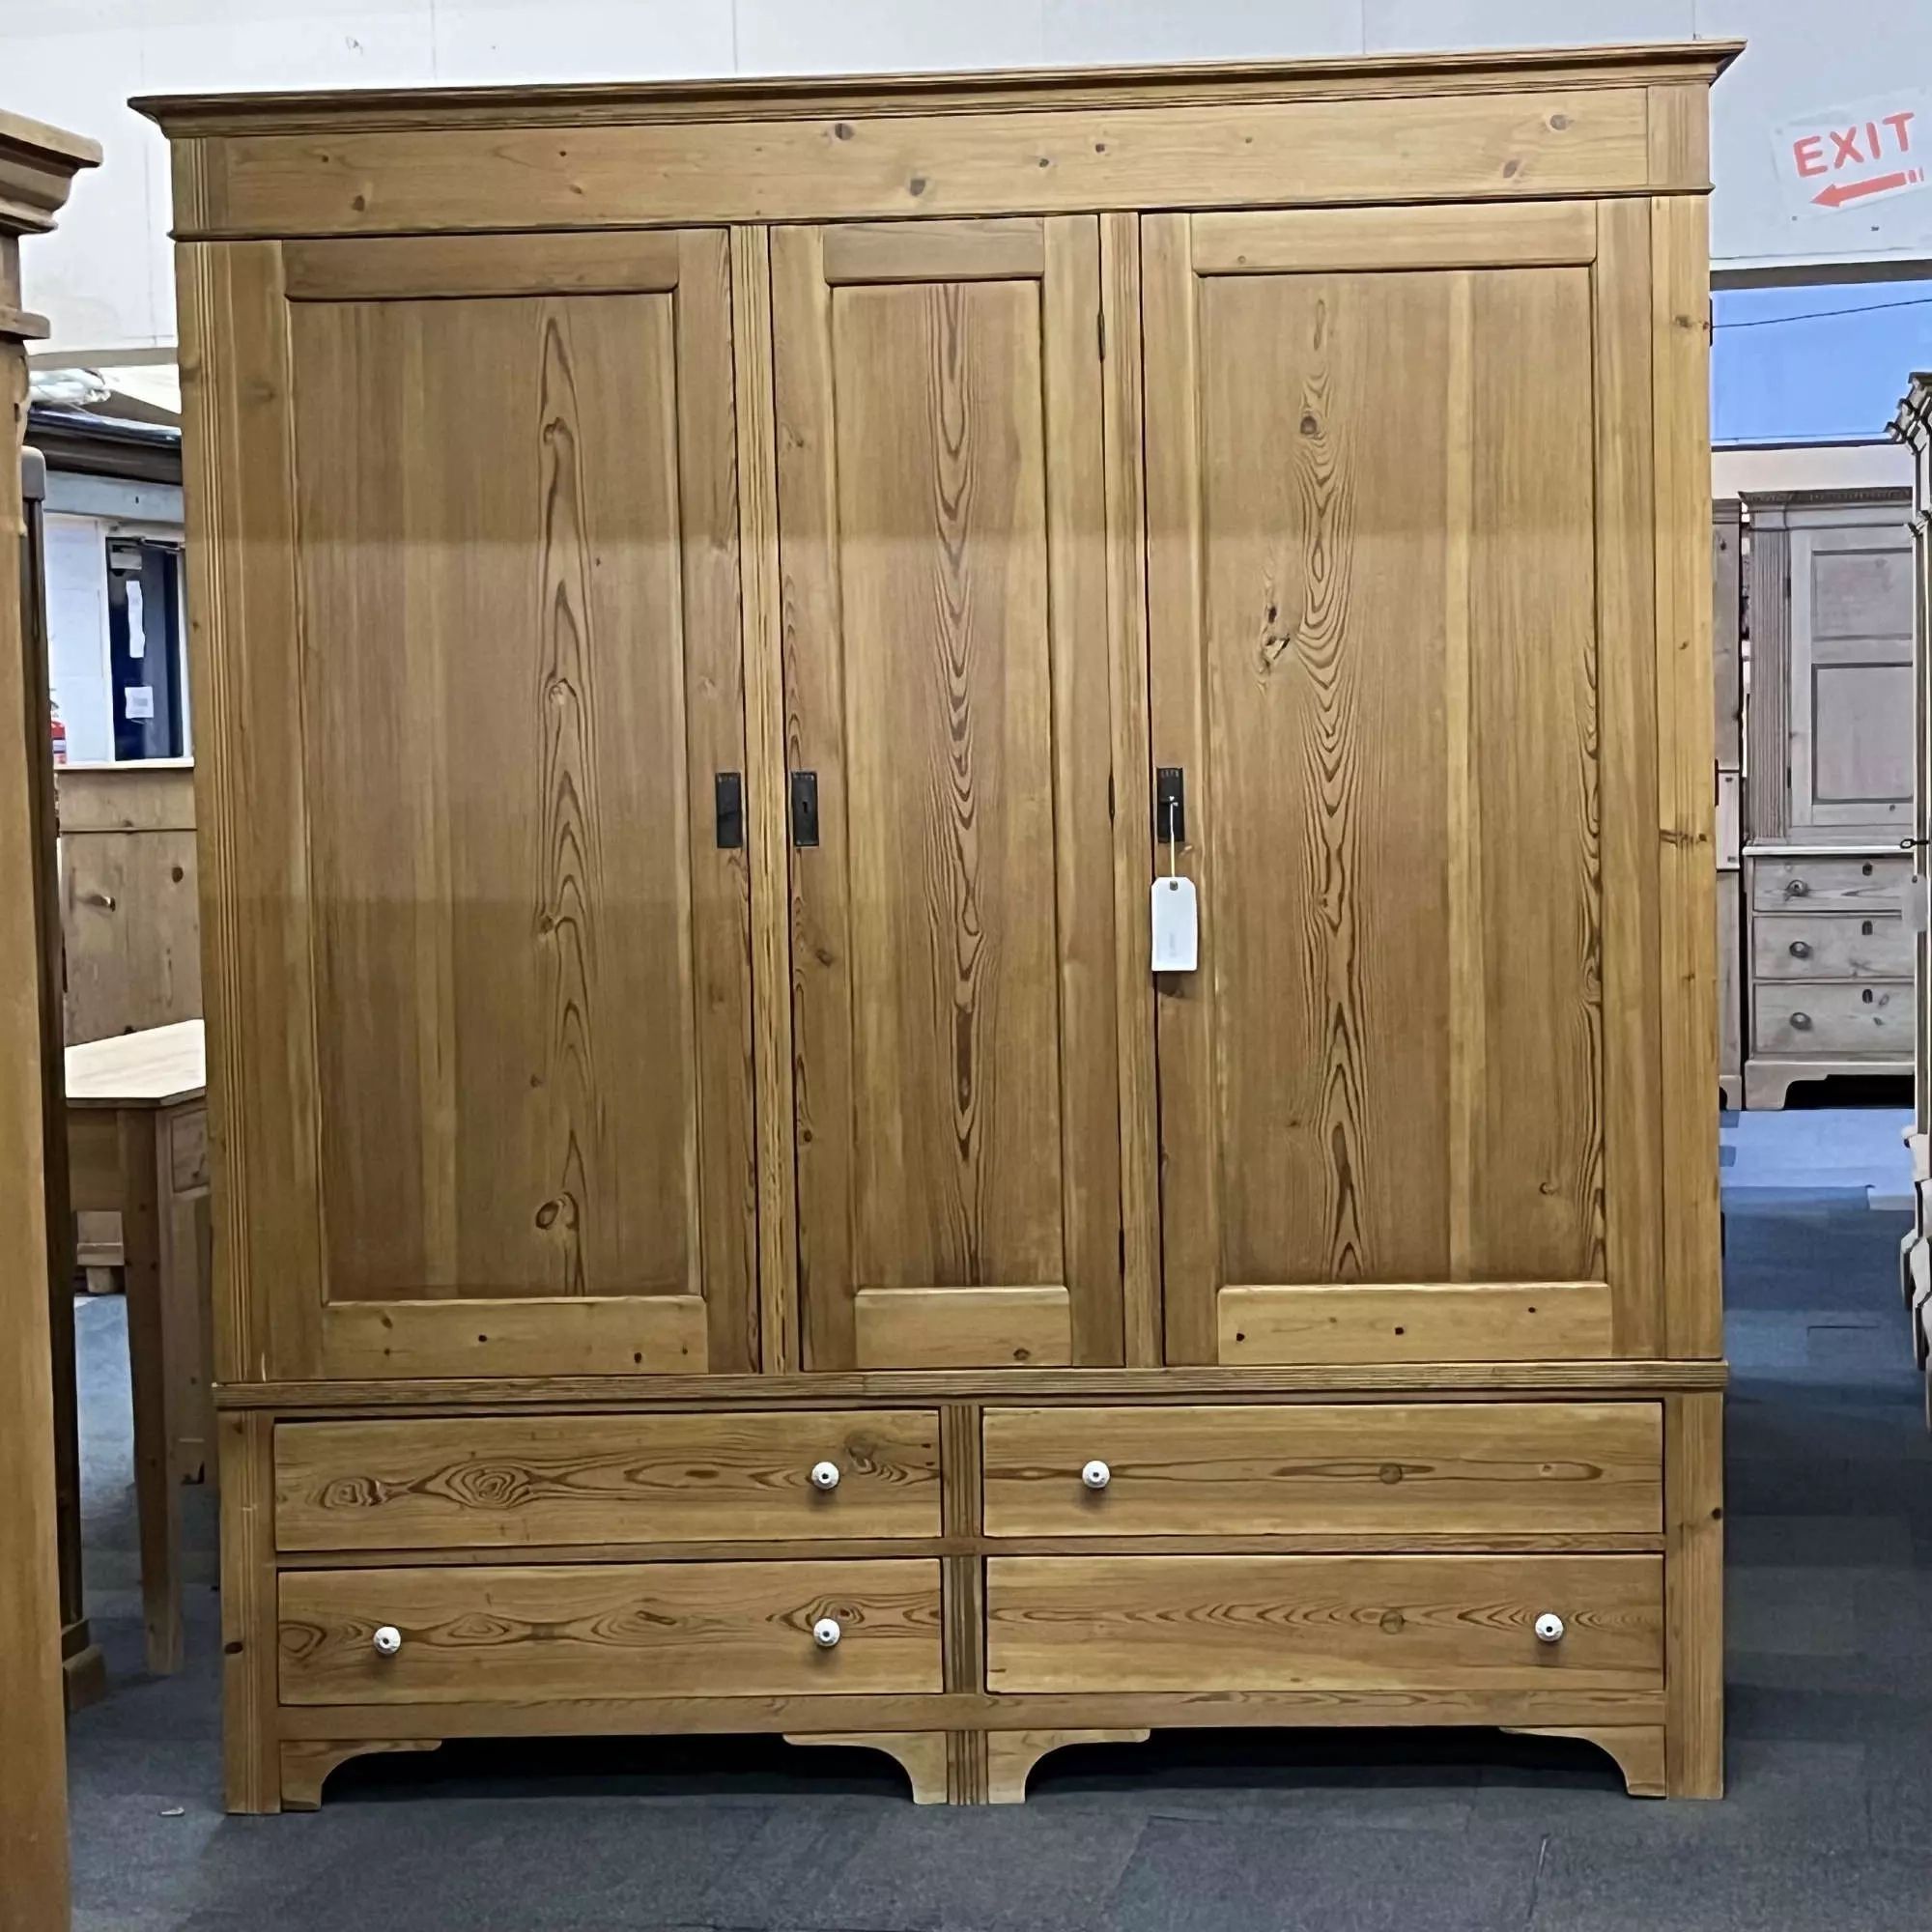 Xtremely Large East German Triple Antique Pine Wardrobe With 4 Drawers  (dismantles) In Antique Wardrobes & Armoires Regarding Large Antique Wardrobes (Photo 5 of 15)